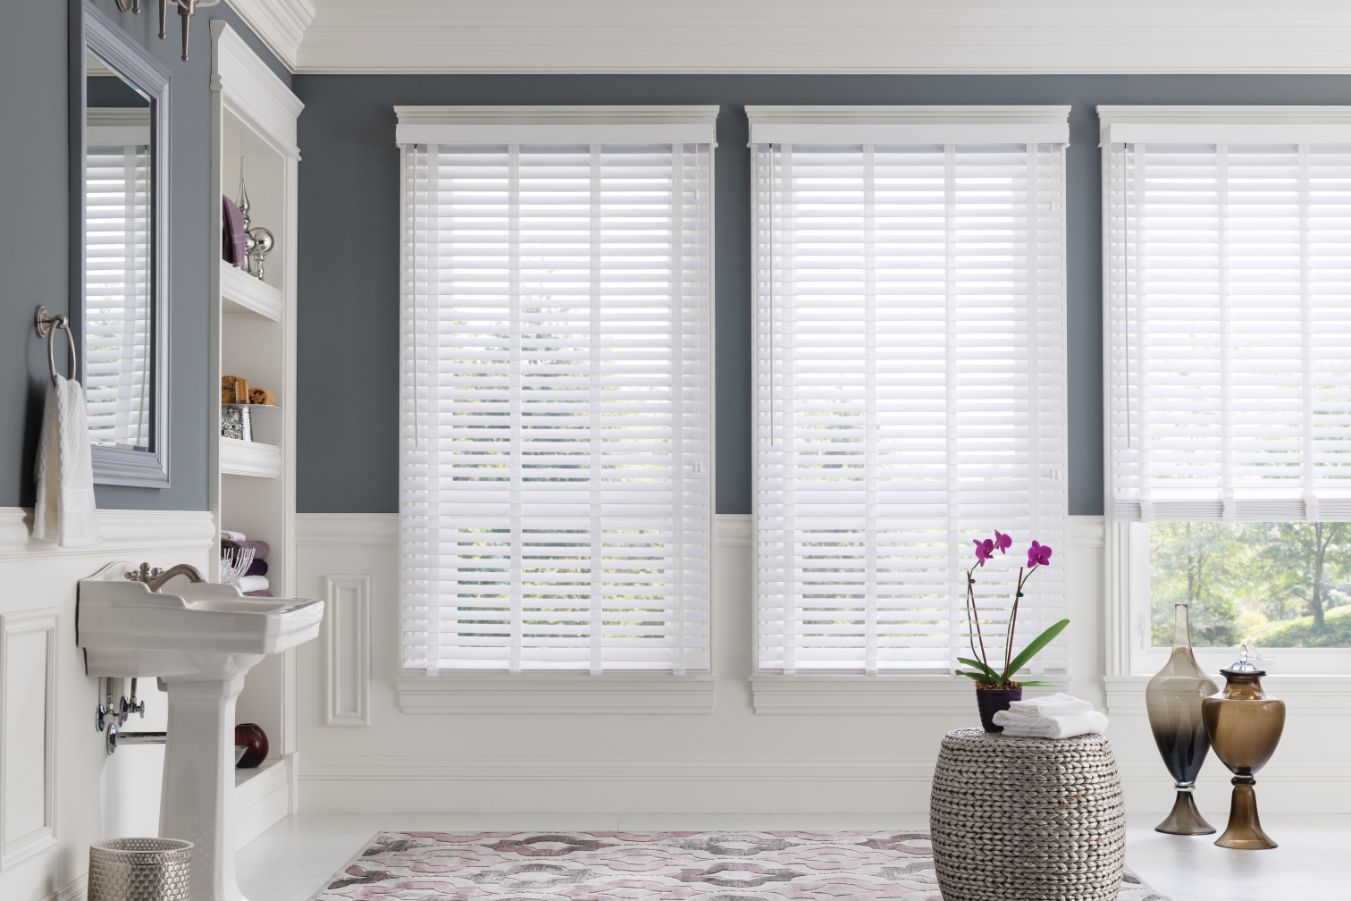 Faux Wood offers timeless appeal and genuine wood blinds at a elegant yet casual look at an affordable price. Please contact Budget Blinds of Chester for more information!